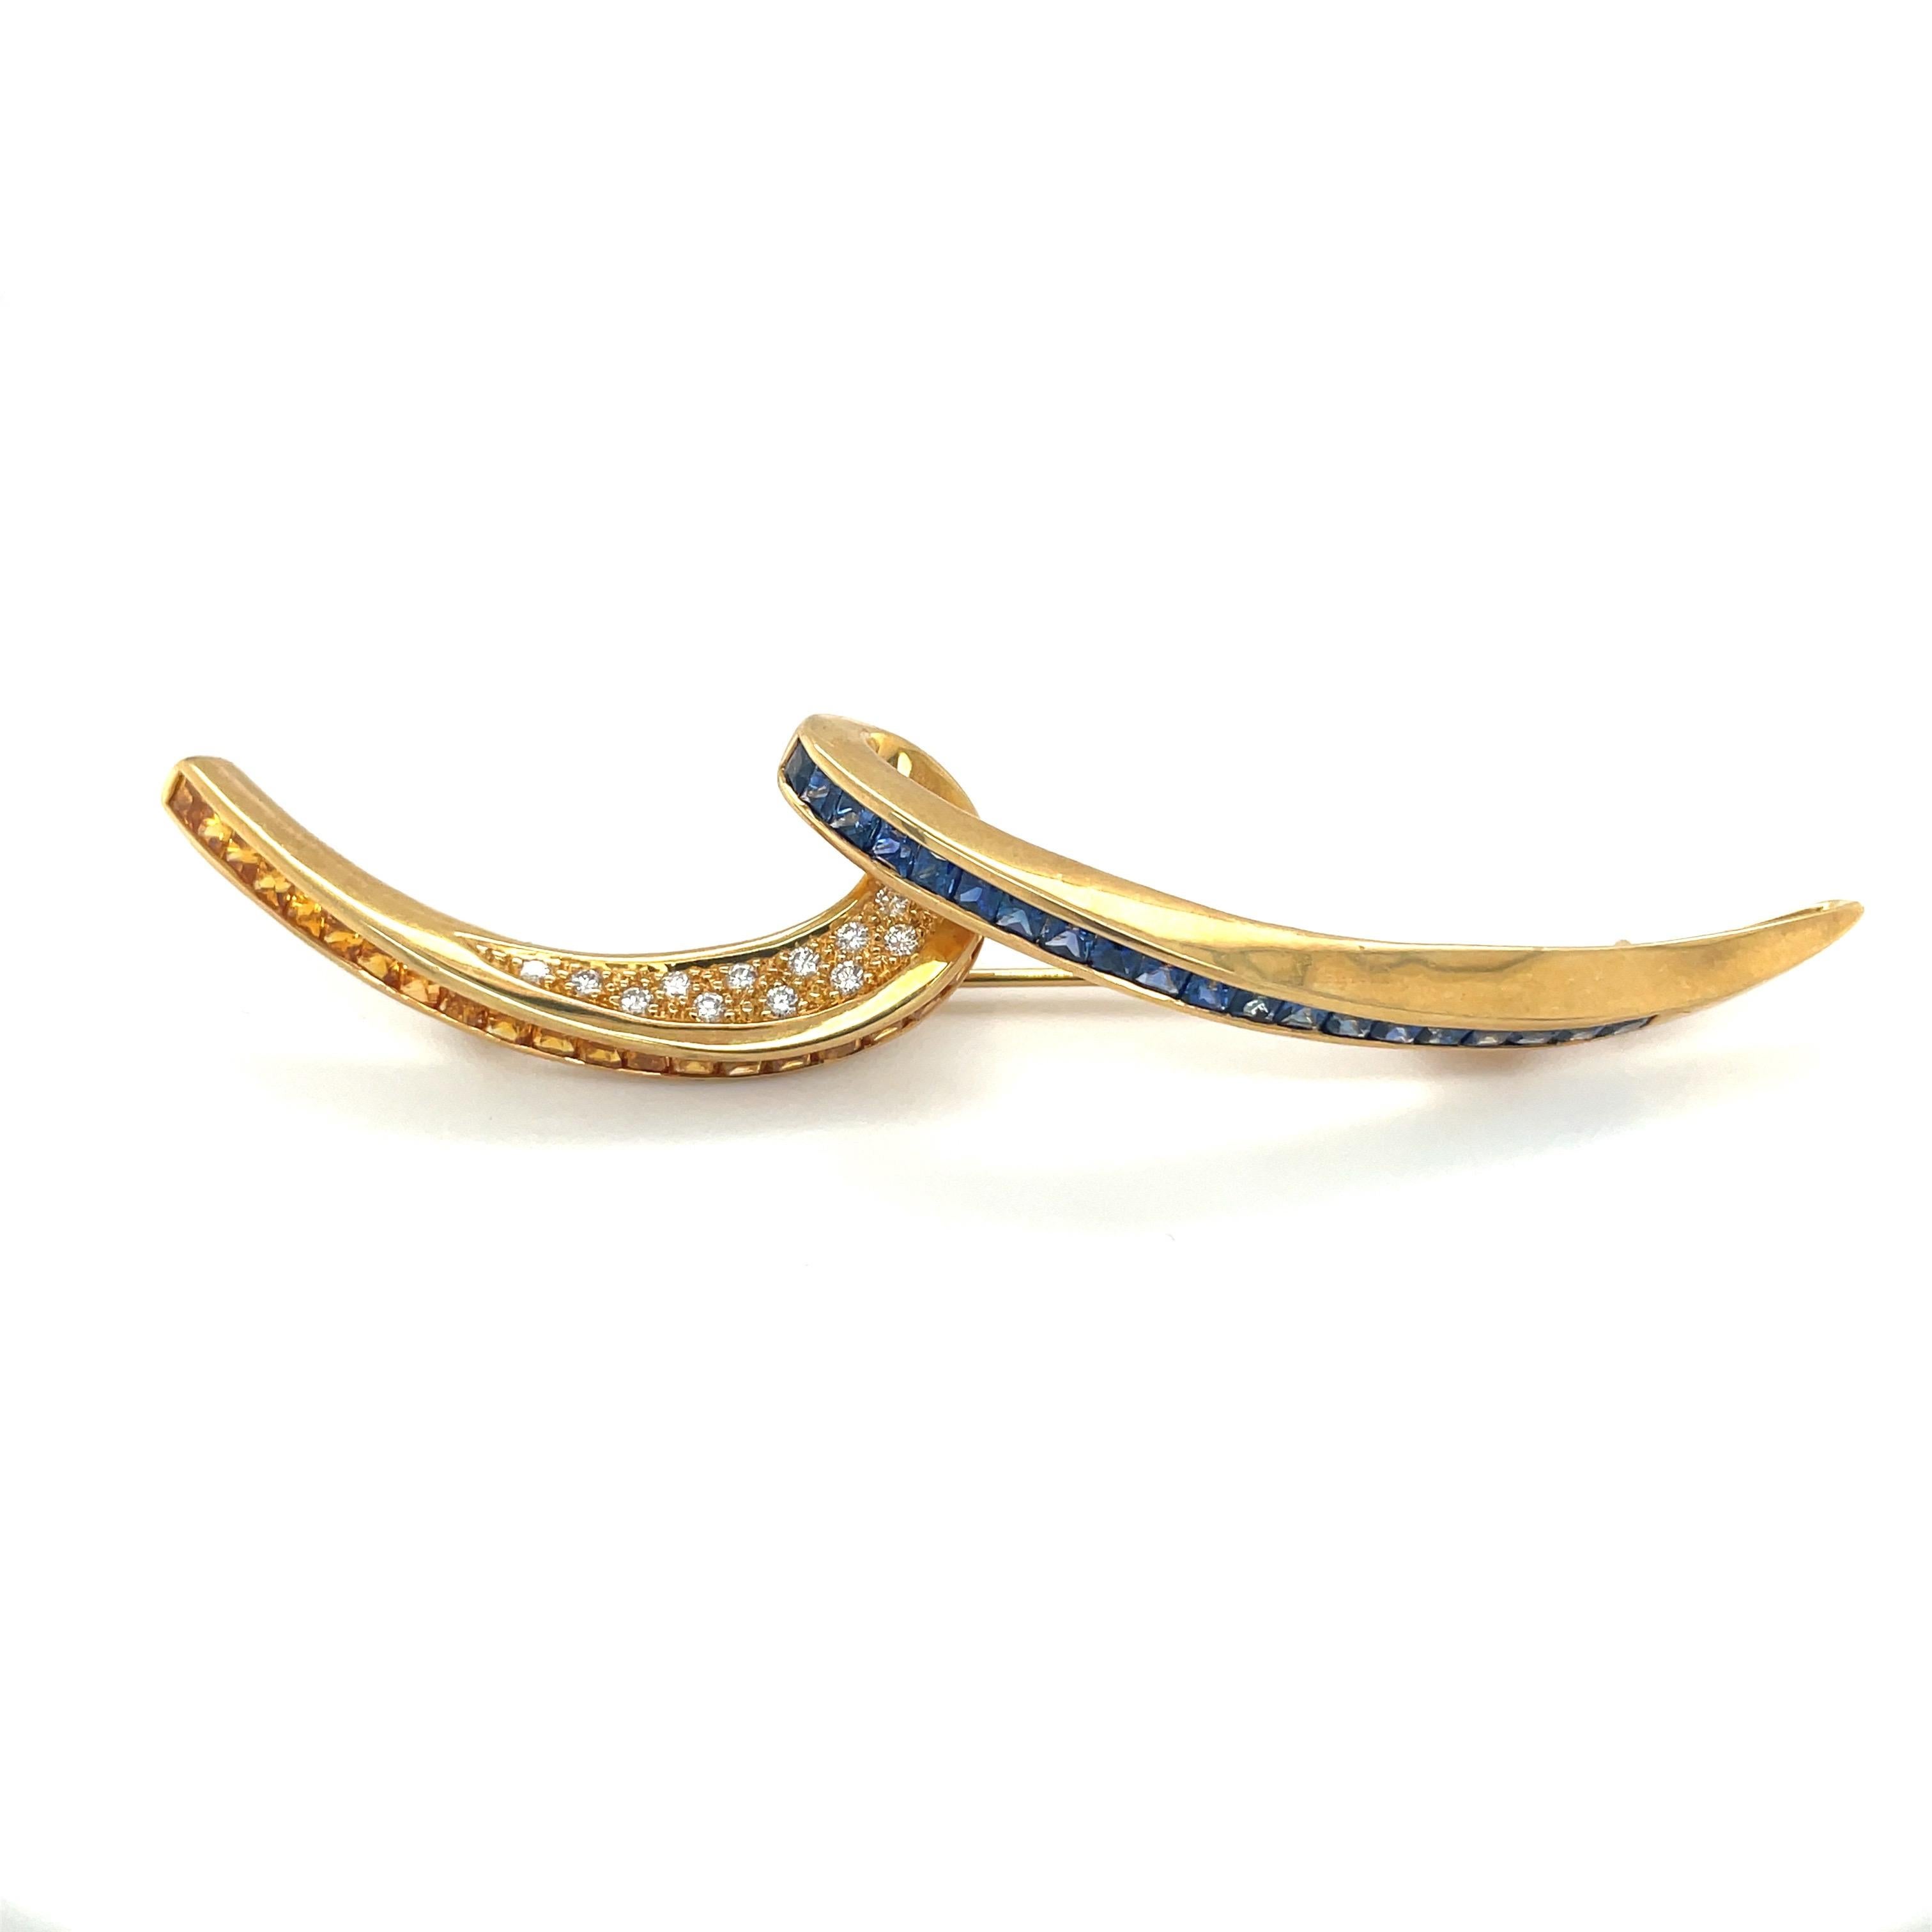 Cellini Jewelers Designed as a fluid ribbon, this 18 karat yellow gold brooch is invisibly set with 3.10 carats of princess cut blue and yellow sapphires . Round diamonds 0.20 carats accent the inside of the ribbon. The elongated brooch measures